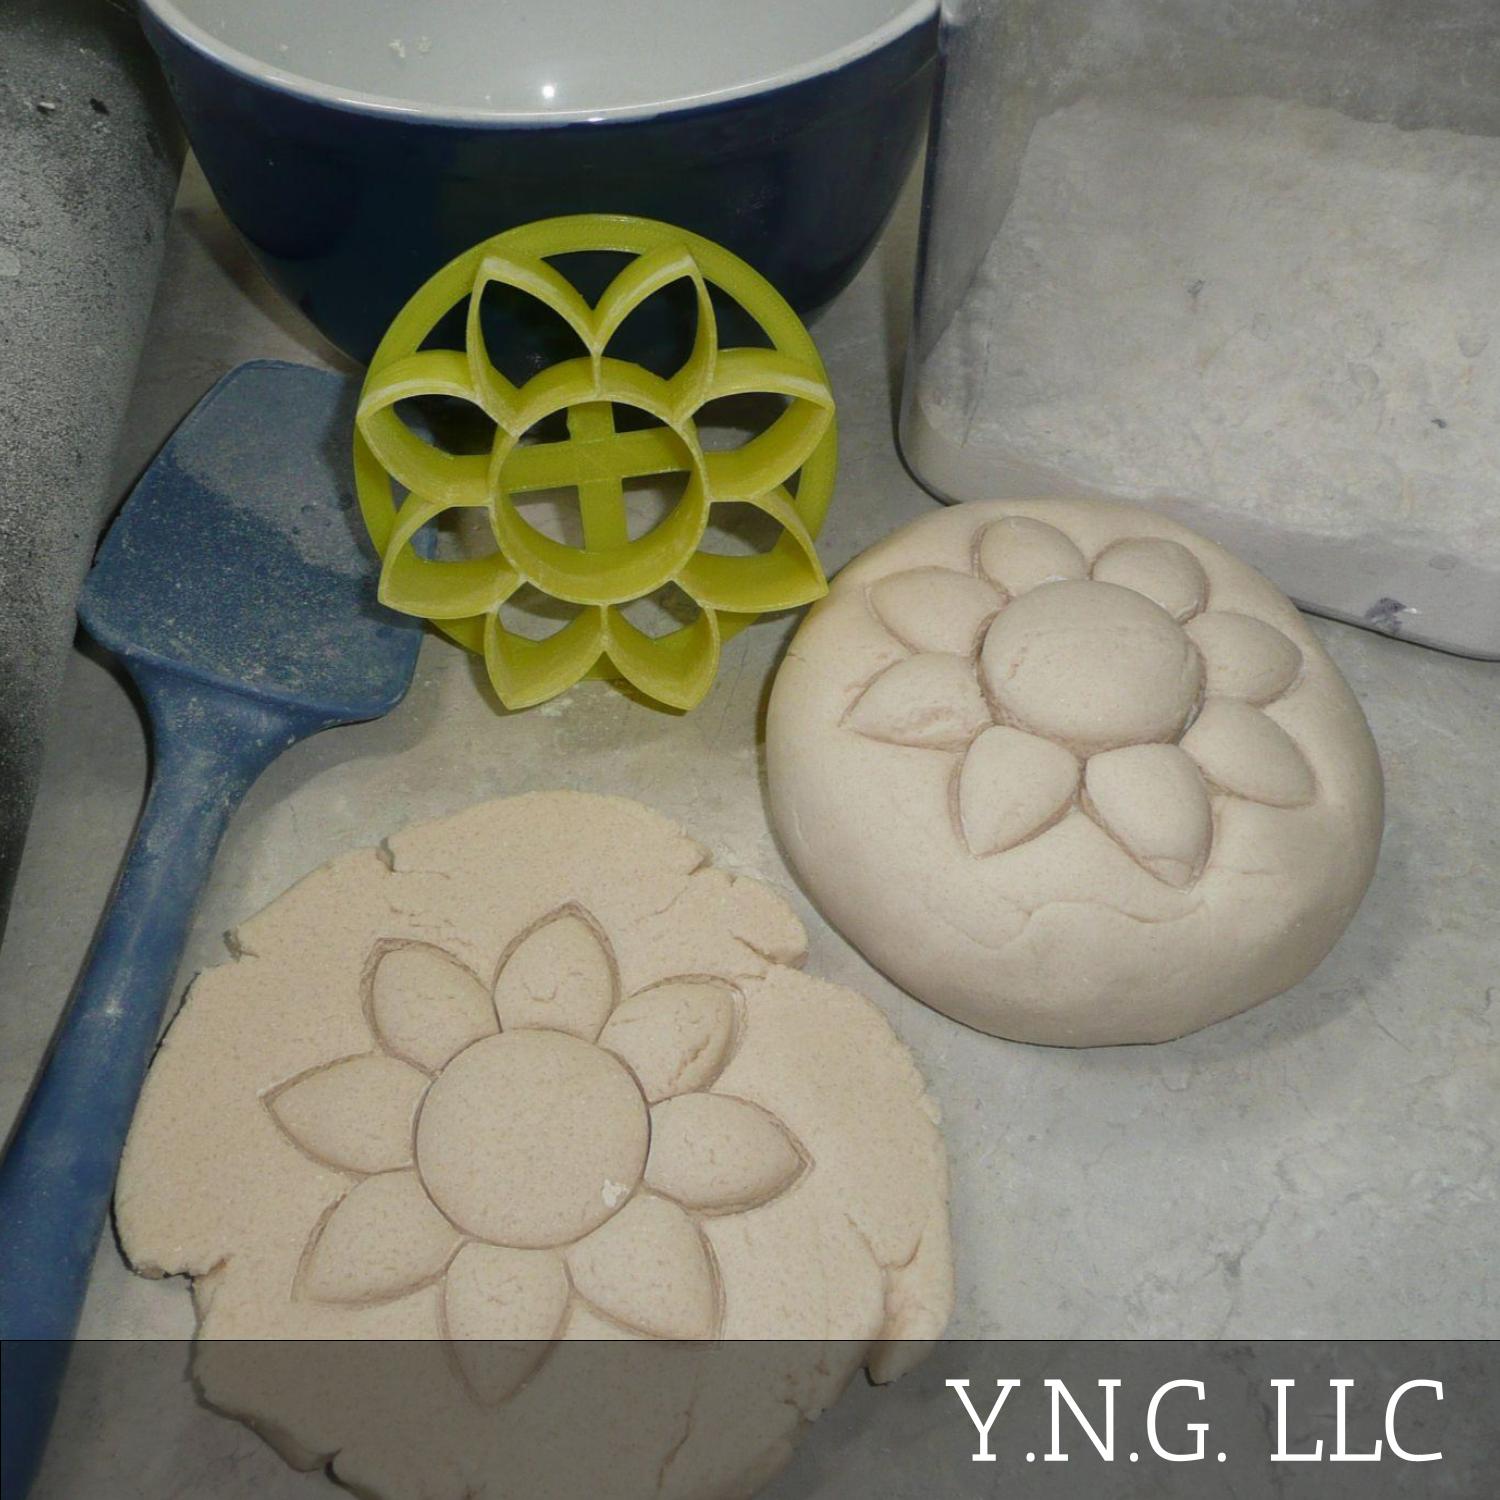 YNGLLC Sunflower Design Pattern Concha Cutter Mexican Sweet Bread Stamp Made in USA PR4519, Yellow